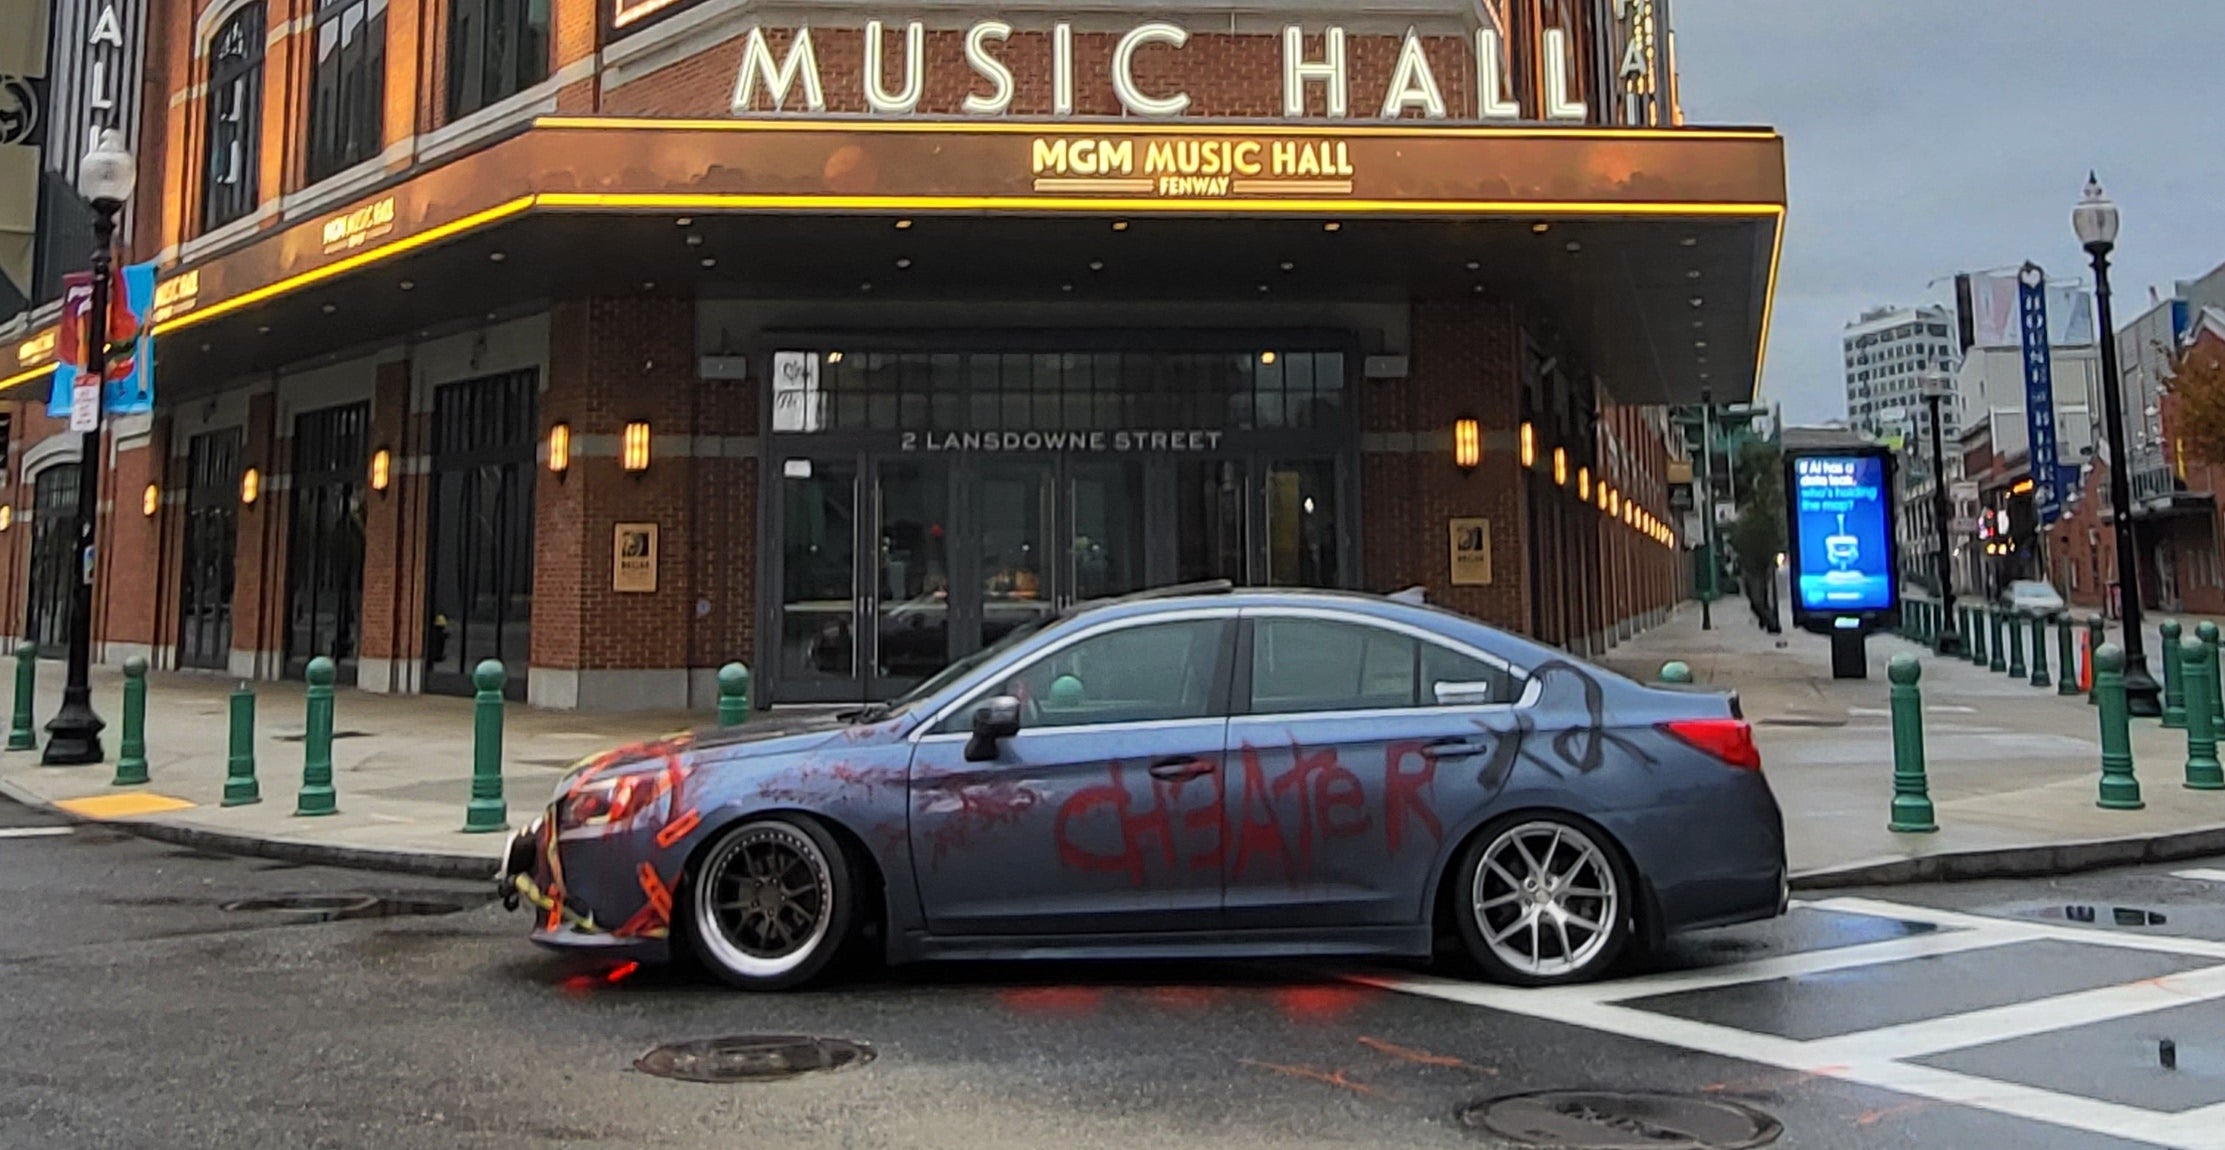 A picture of a gray Subaru, covered in caution tape and red paint that spells out the word "ch3ater." The car is parked in front of the MGM Music Hall in Boston.